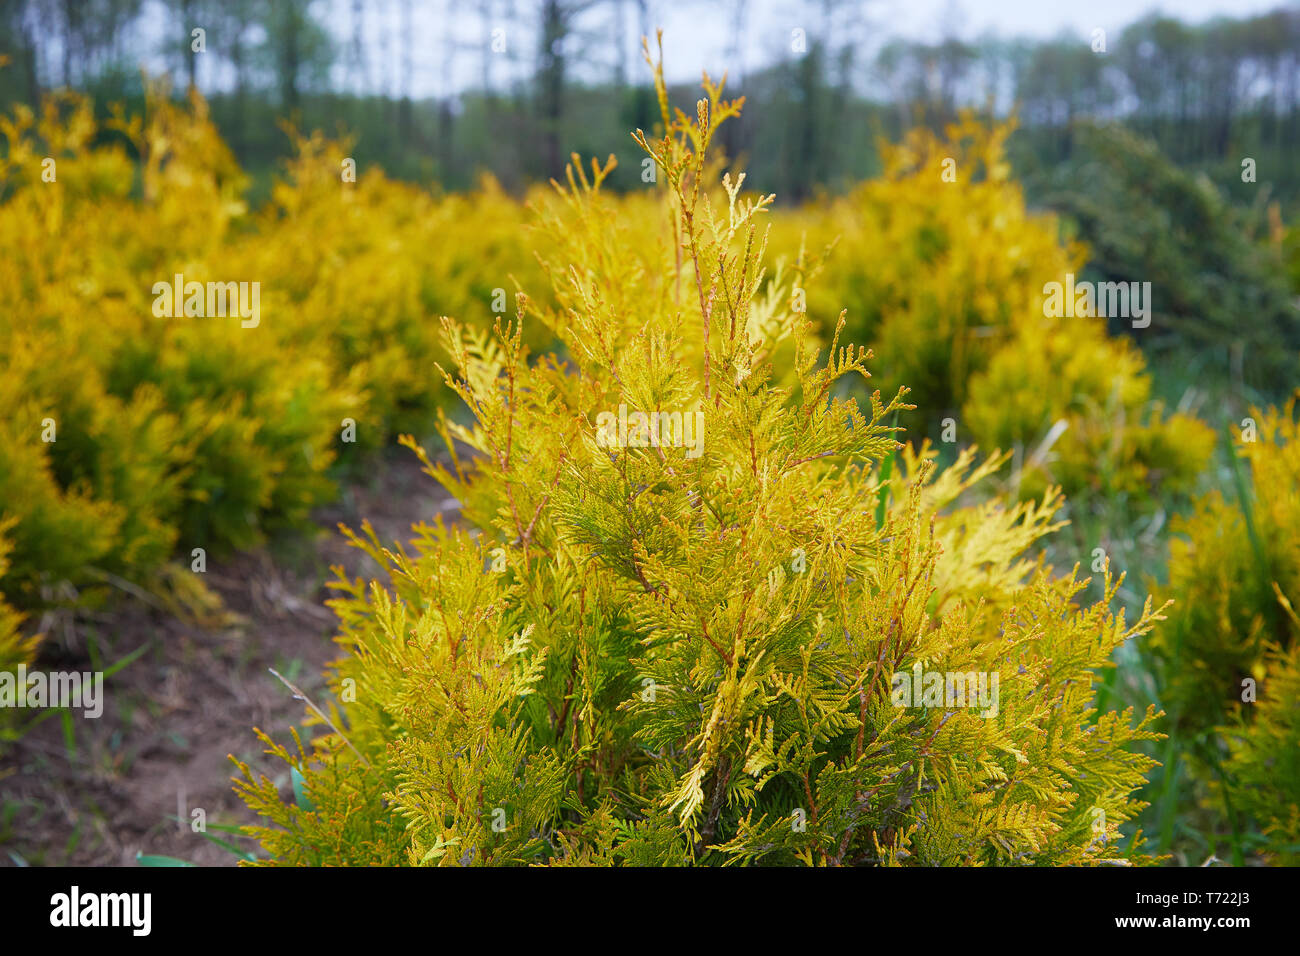 Thuja occidentalis in garden center. Plant nursery. Decorative potted plant at flower shop Stock Photo